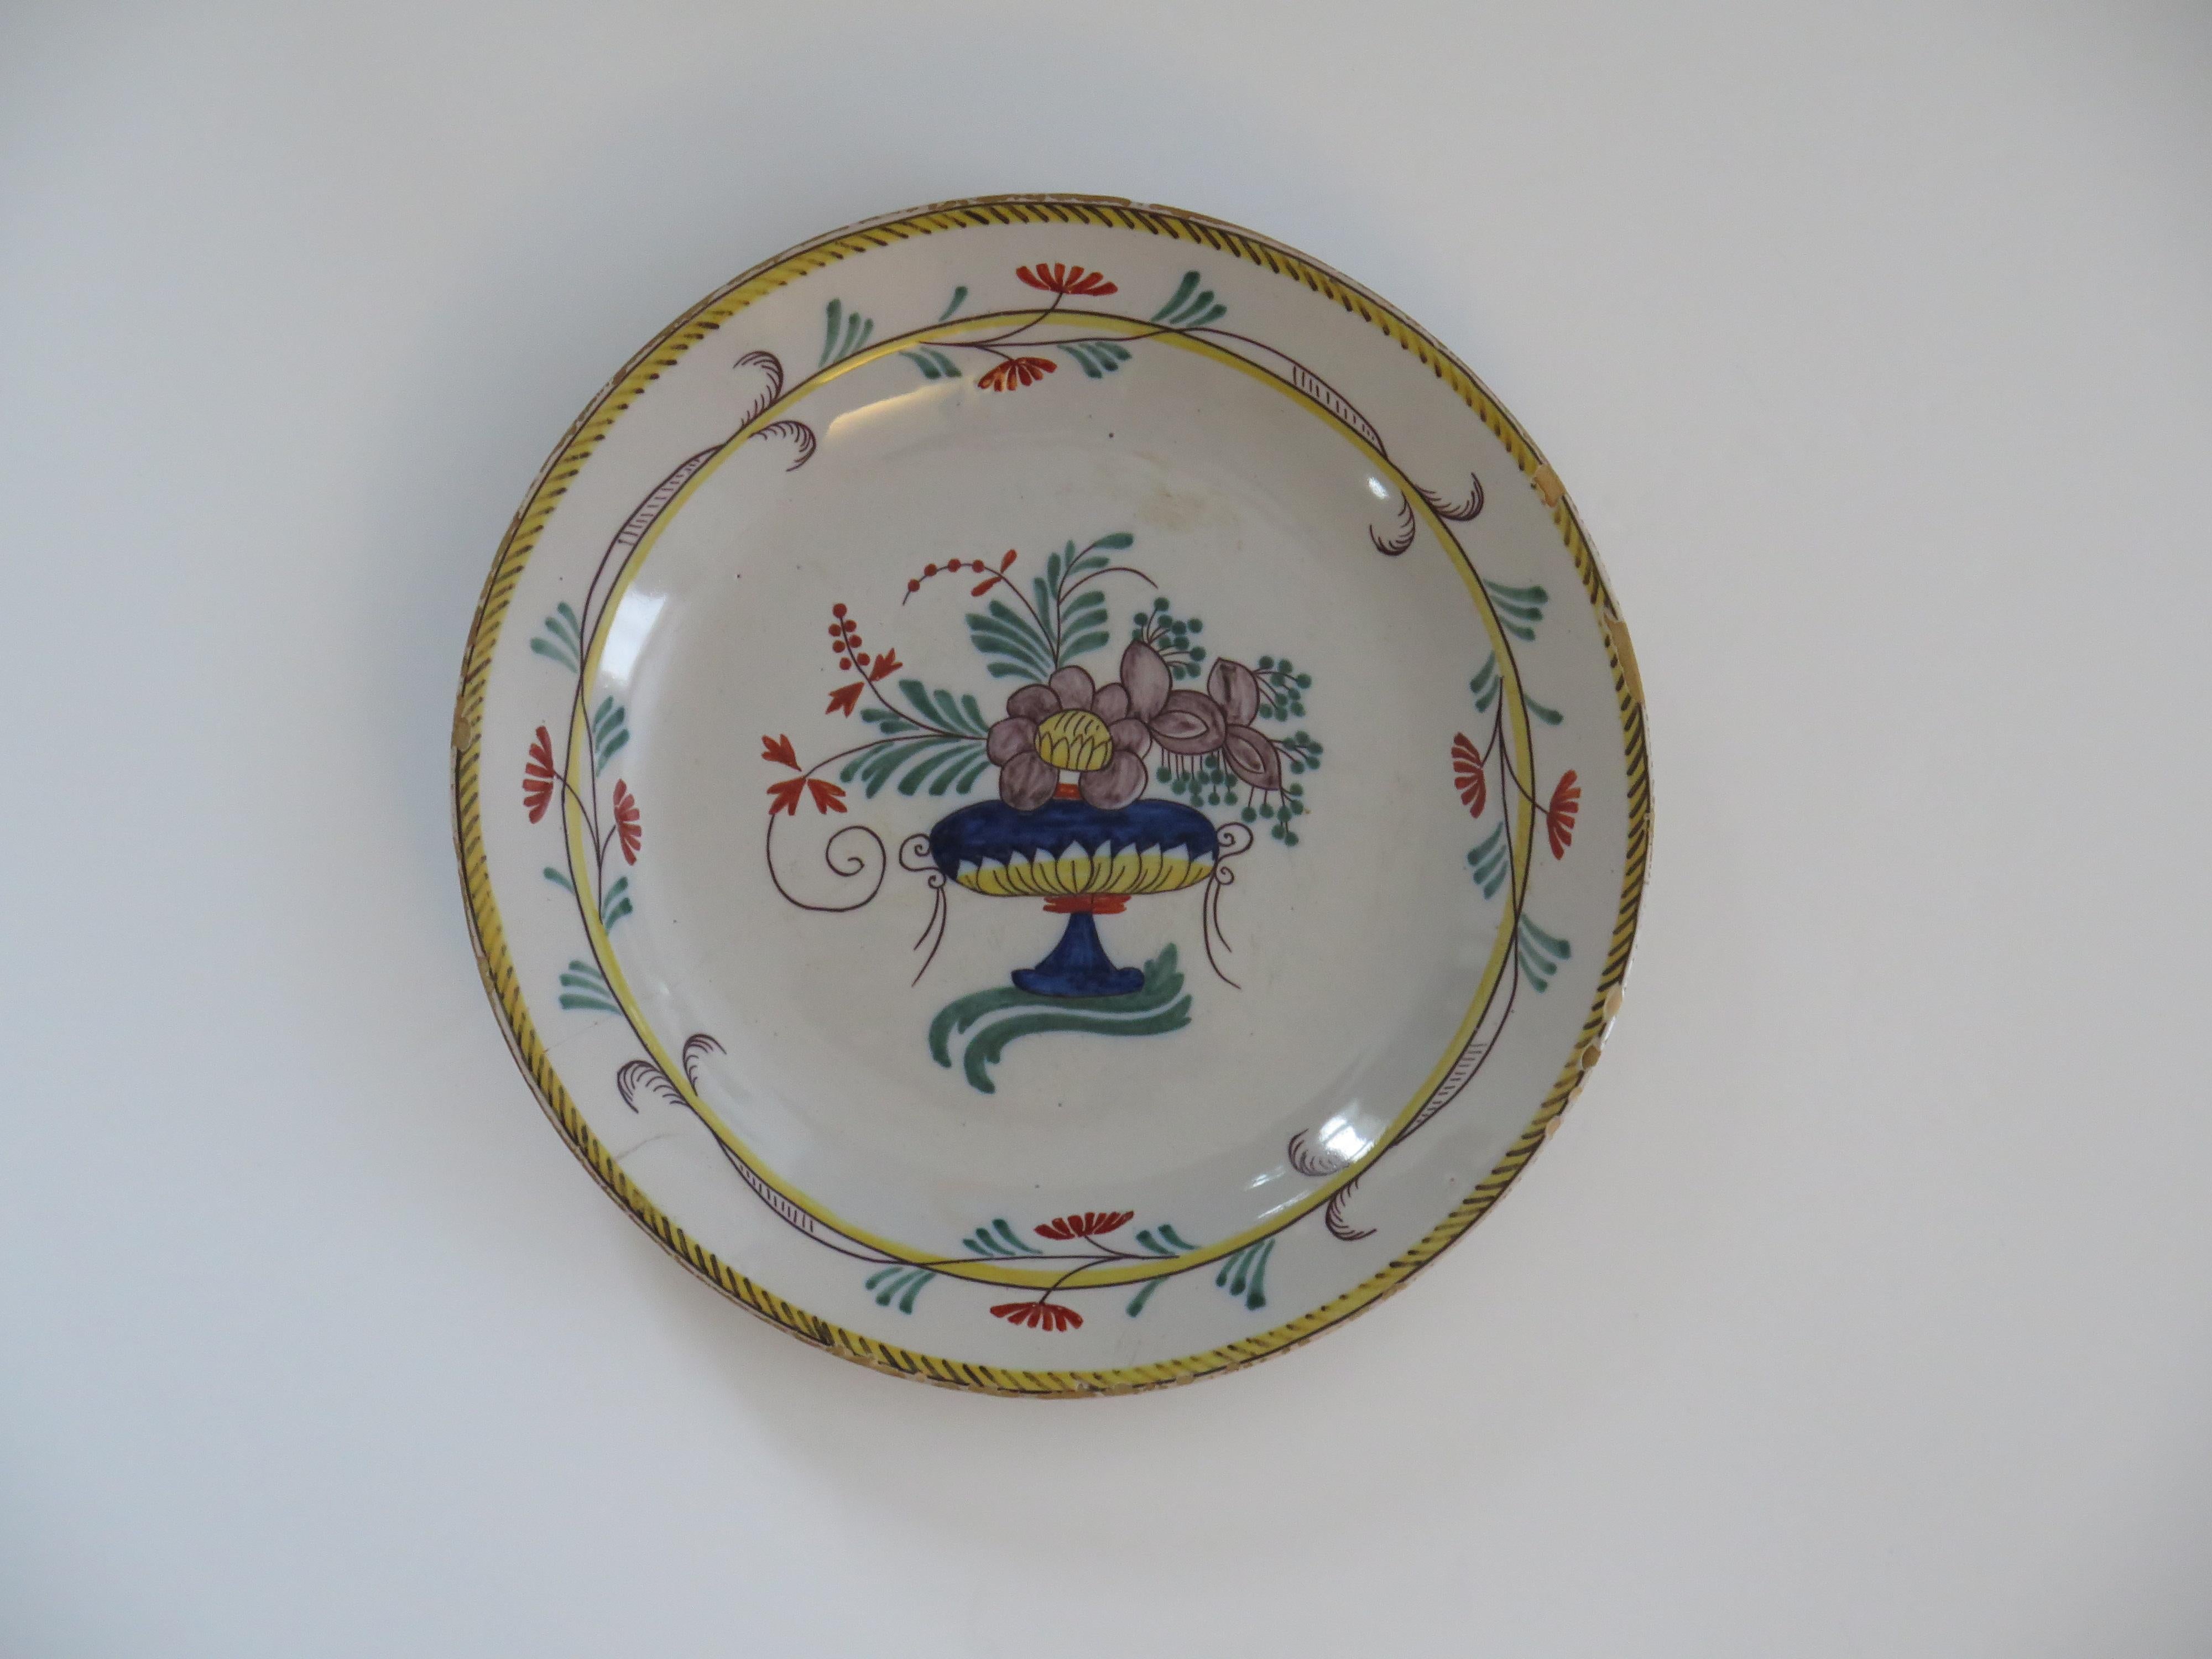 This is a very decorative French Faience plate dinner plate made from tin-glazed earthenware (pottery) which we date to the late 18th century.

The plate has a pan shaped base with no foot rim.

This plate is hand-painted in a flowing style with